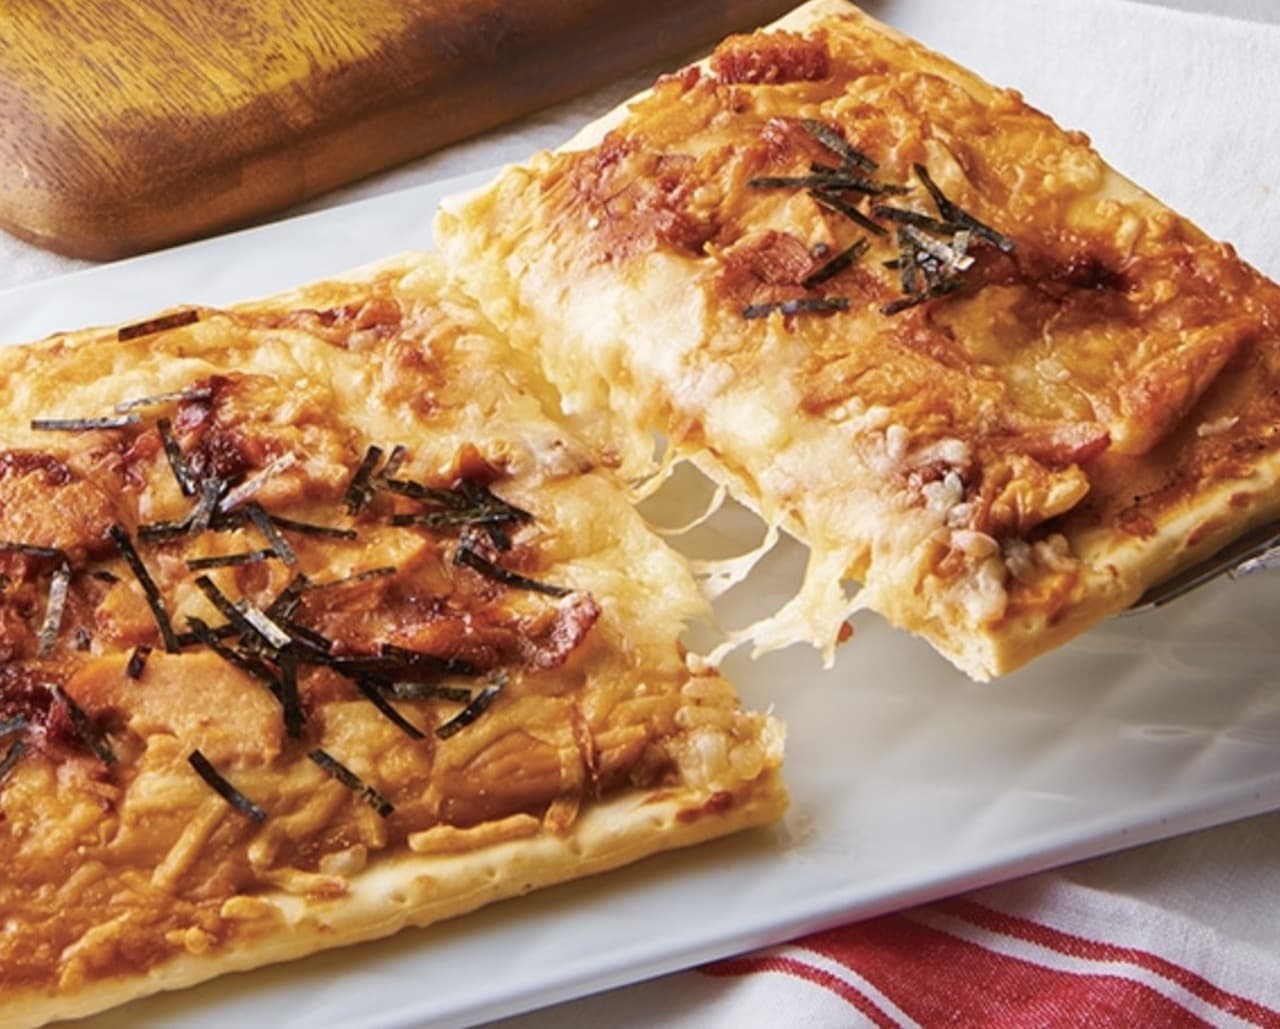 Shateraise "Oven-ready Pizza with Teriyaki Mayo Chicken".